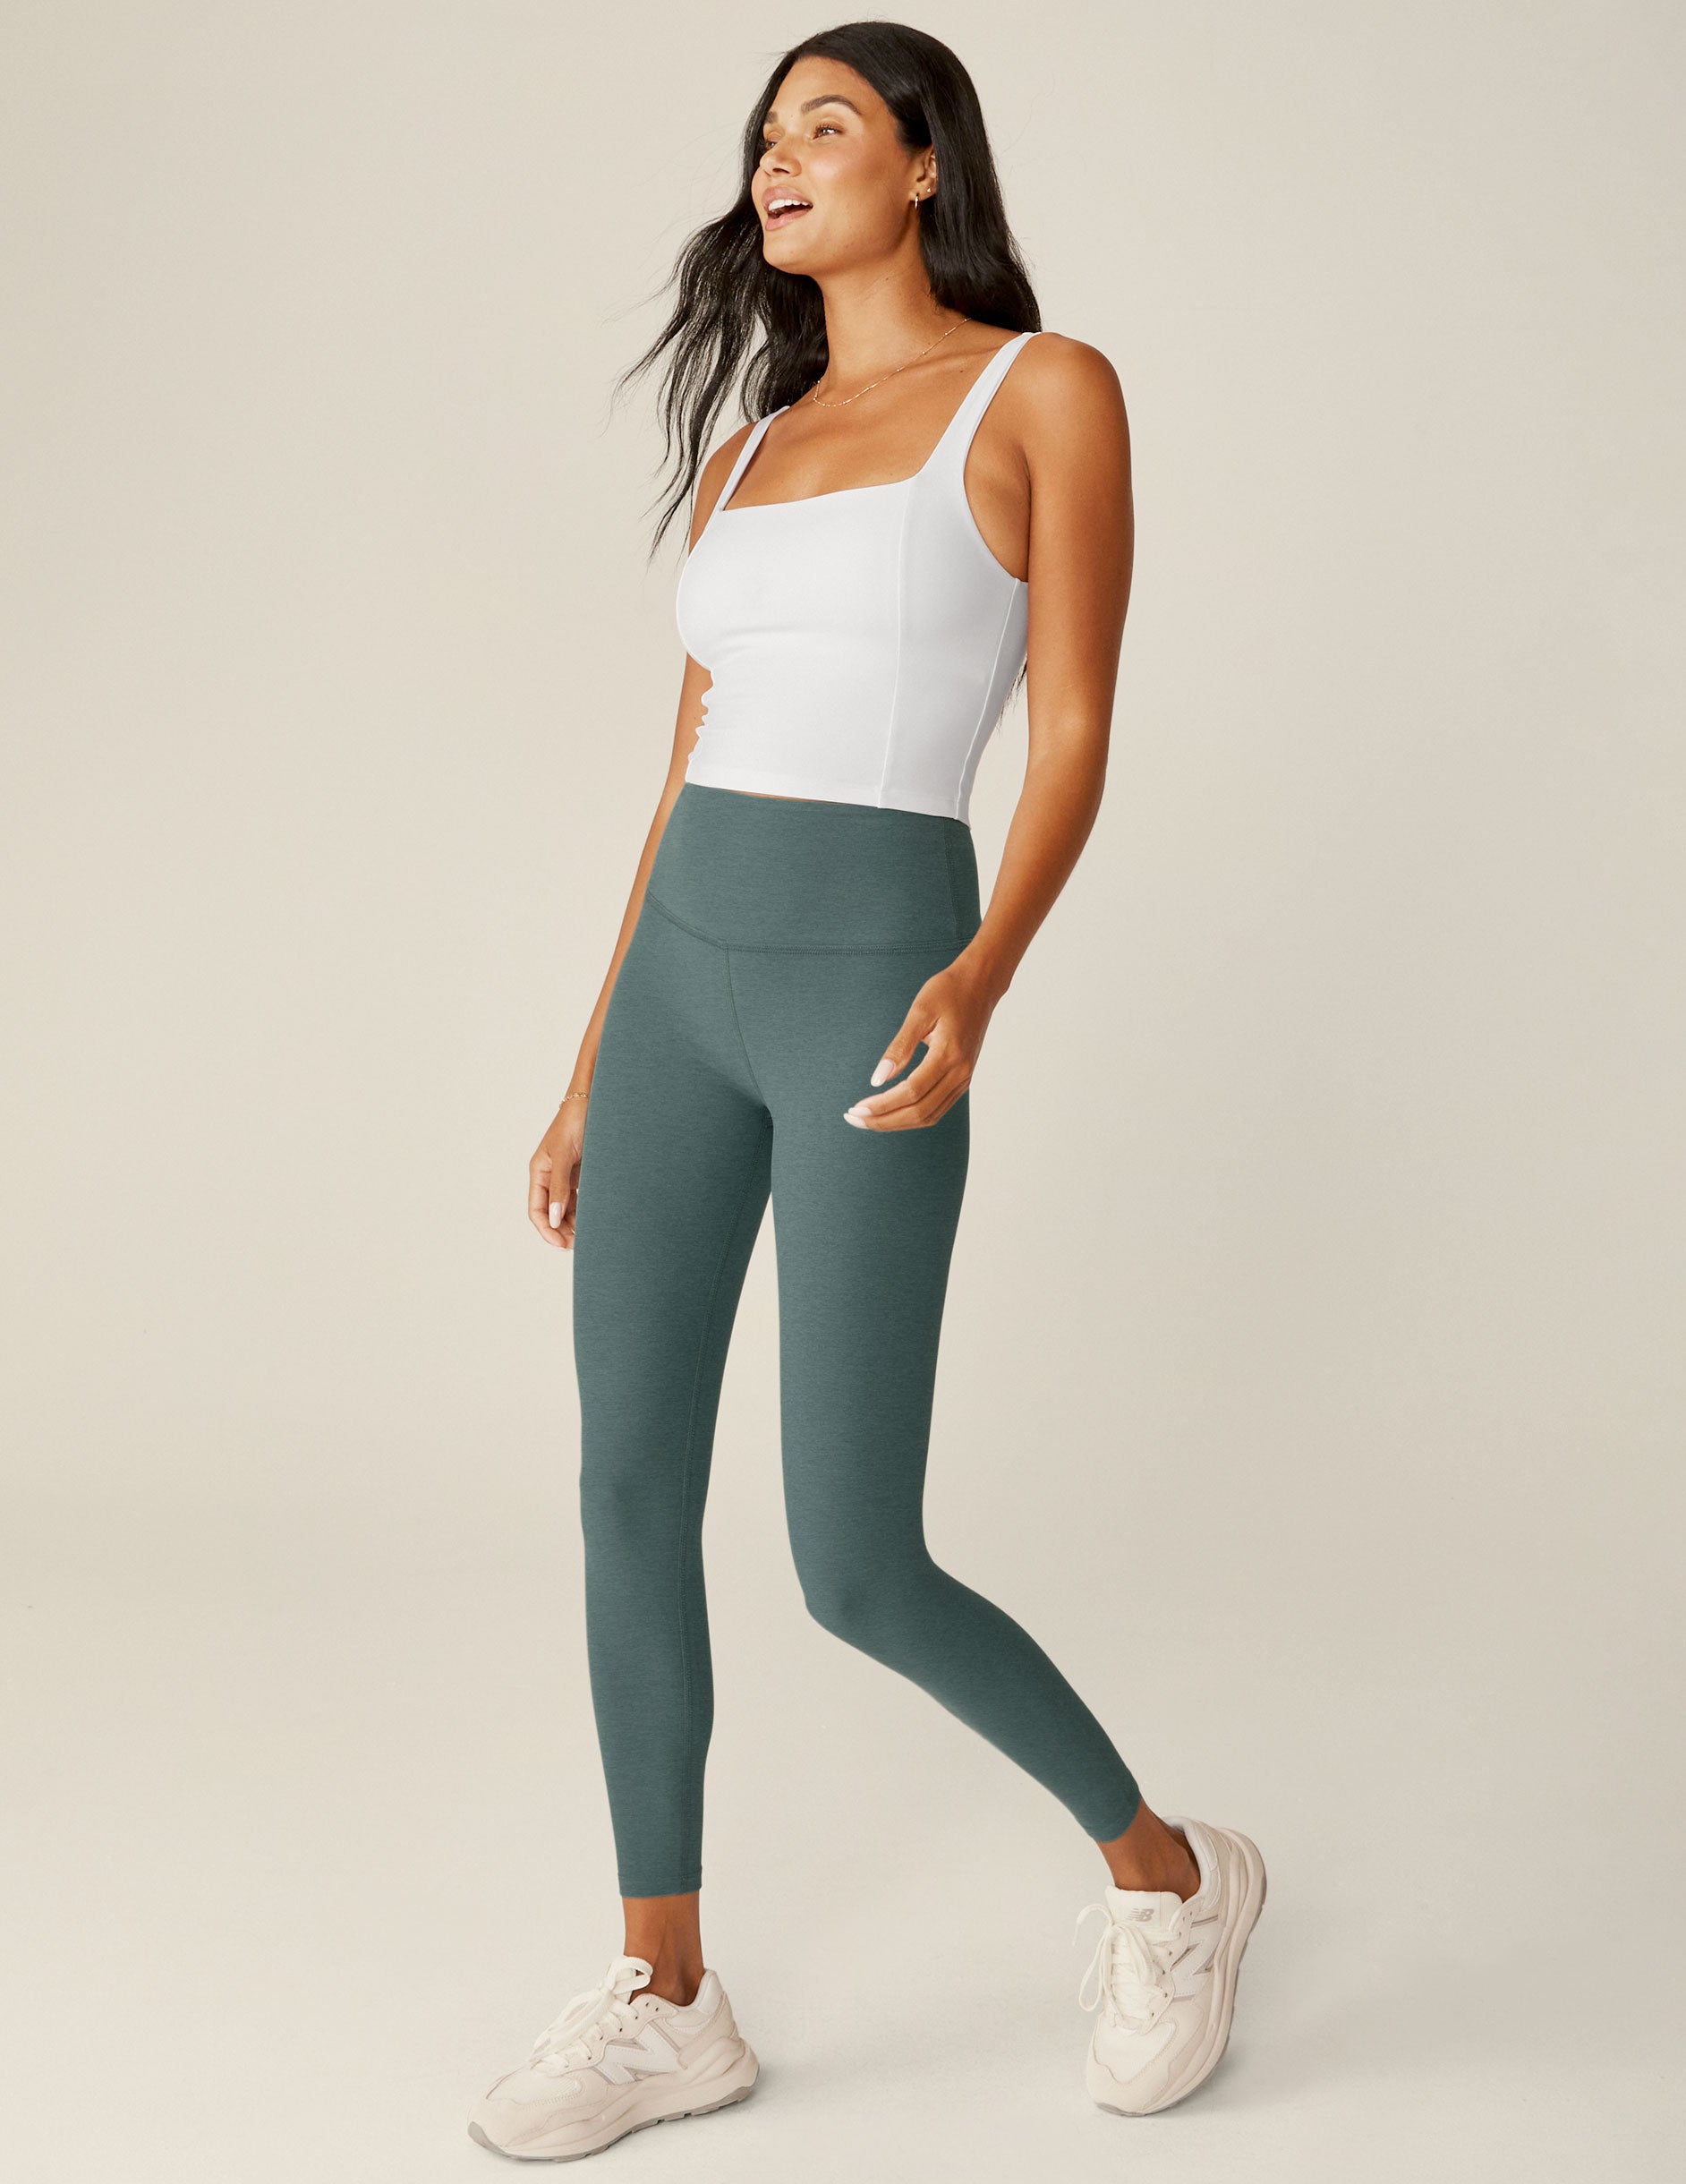 Spacedye Caught in the Midi High Waisted Legging - Limeade Heather